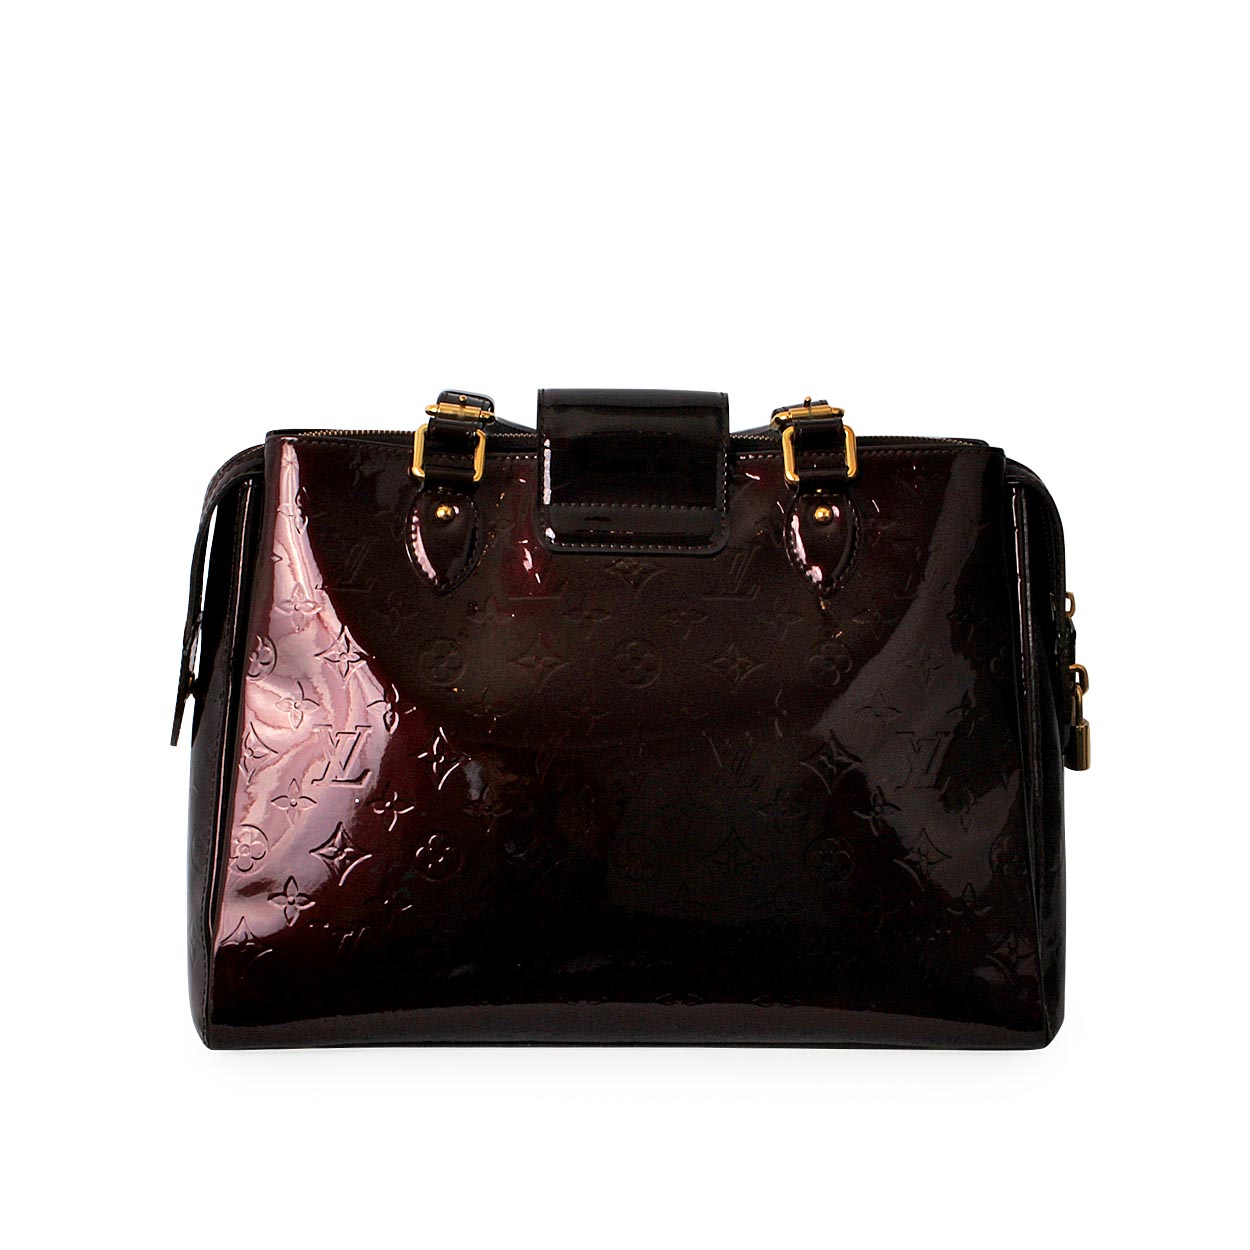 LOUIS VUITTON Women's Melrose Patent leather in Violet